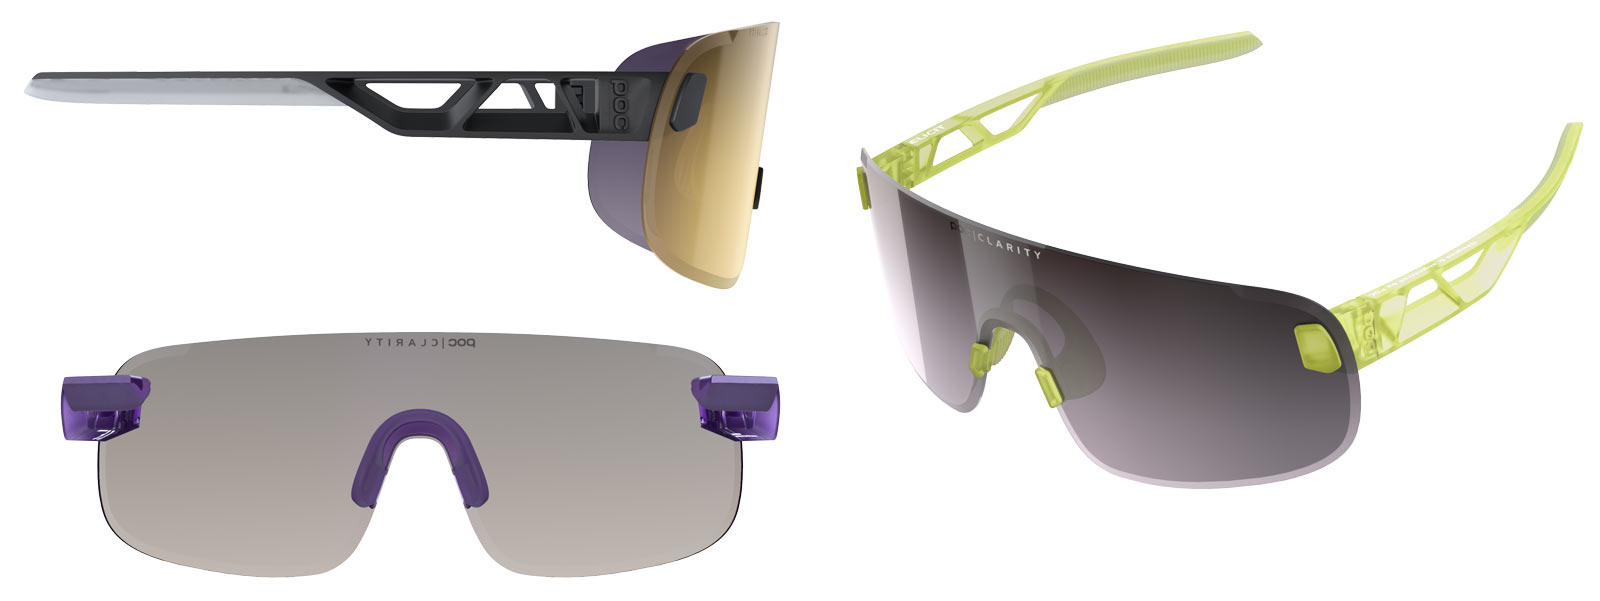 poc elicit are the lightest cycling sunglasses